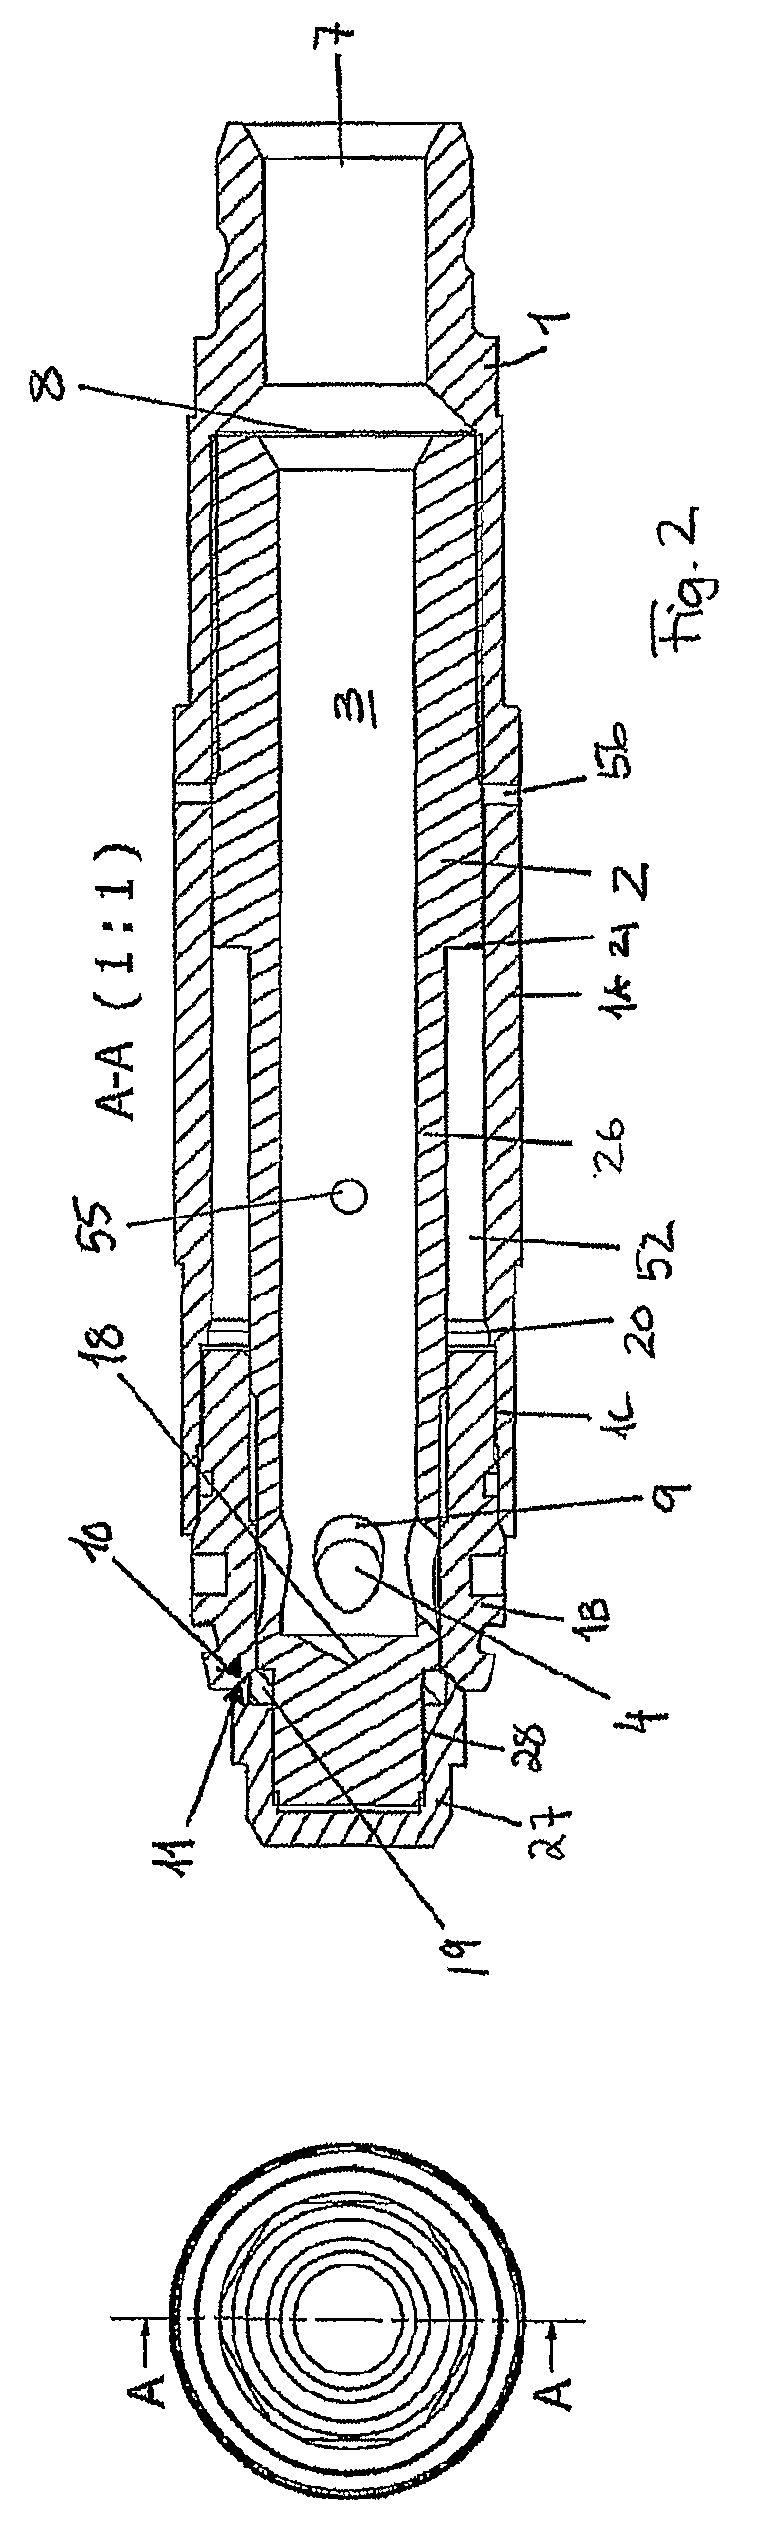 Fluid injection device